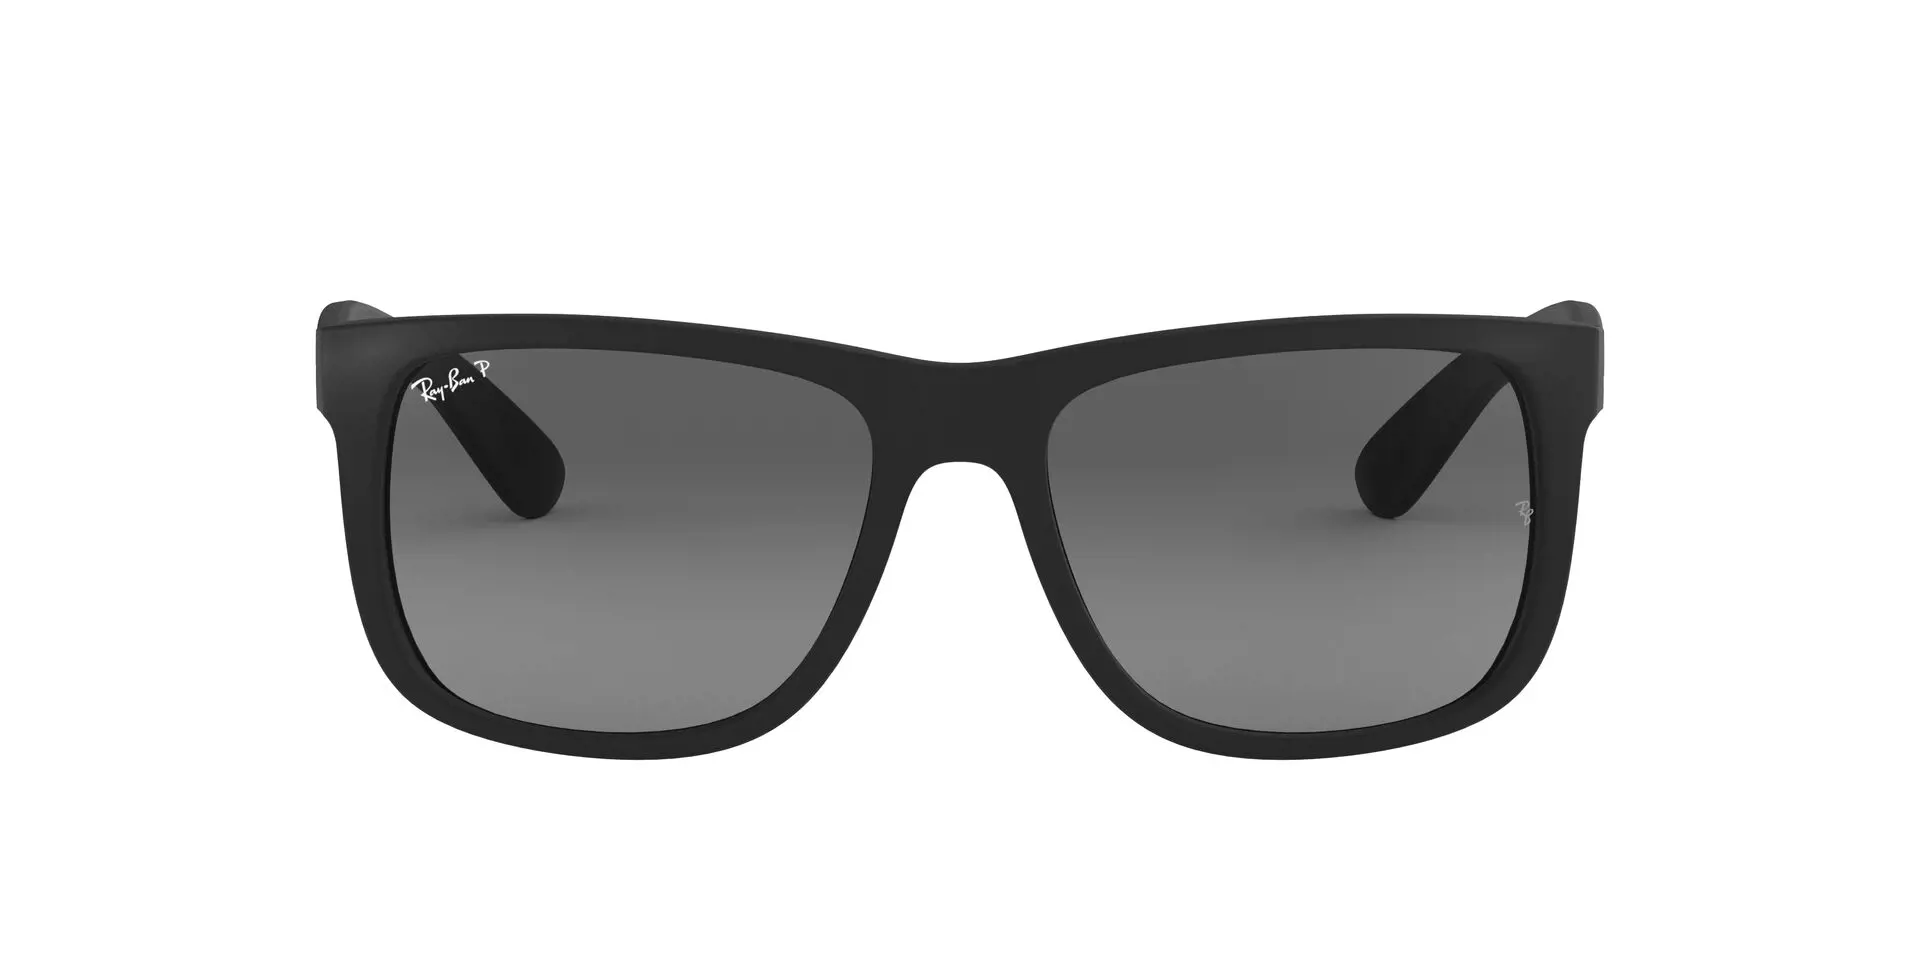 Ray-Ban Justin RB4165 622/T3